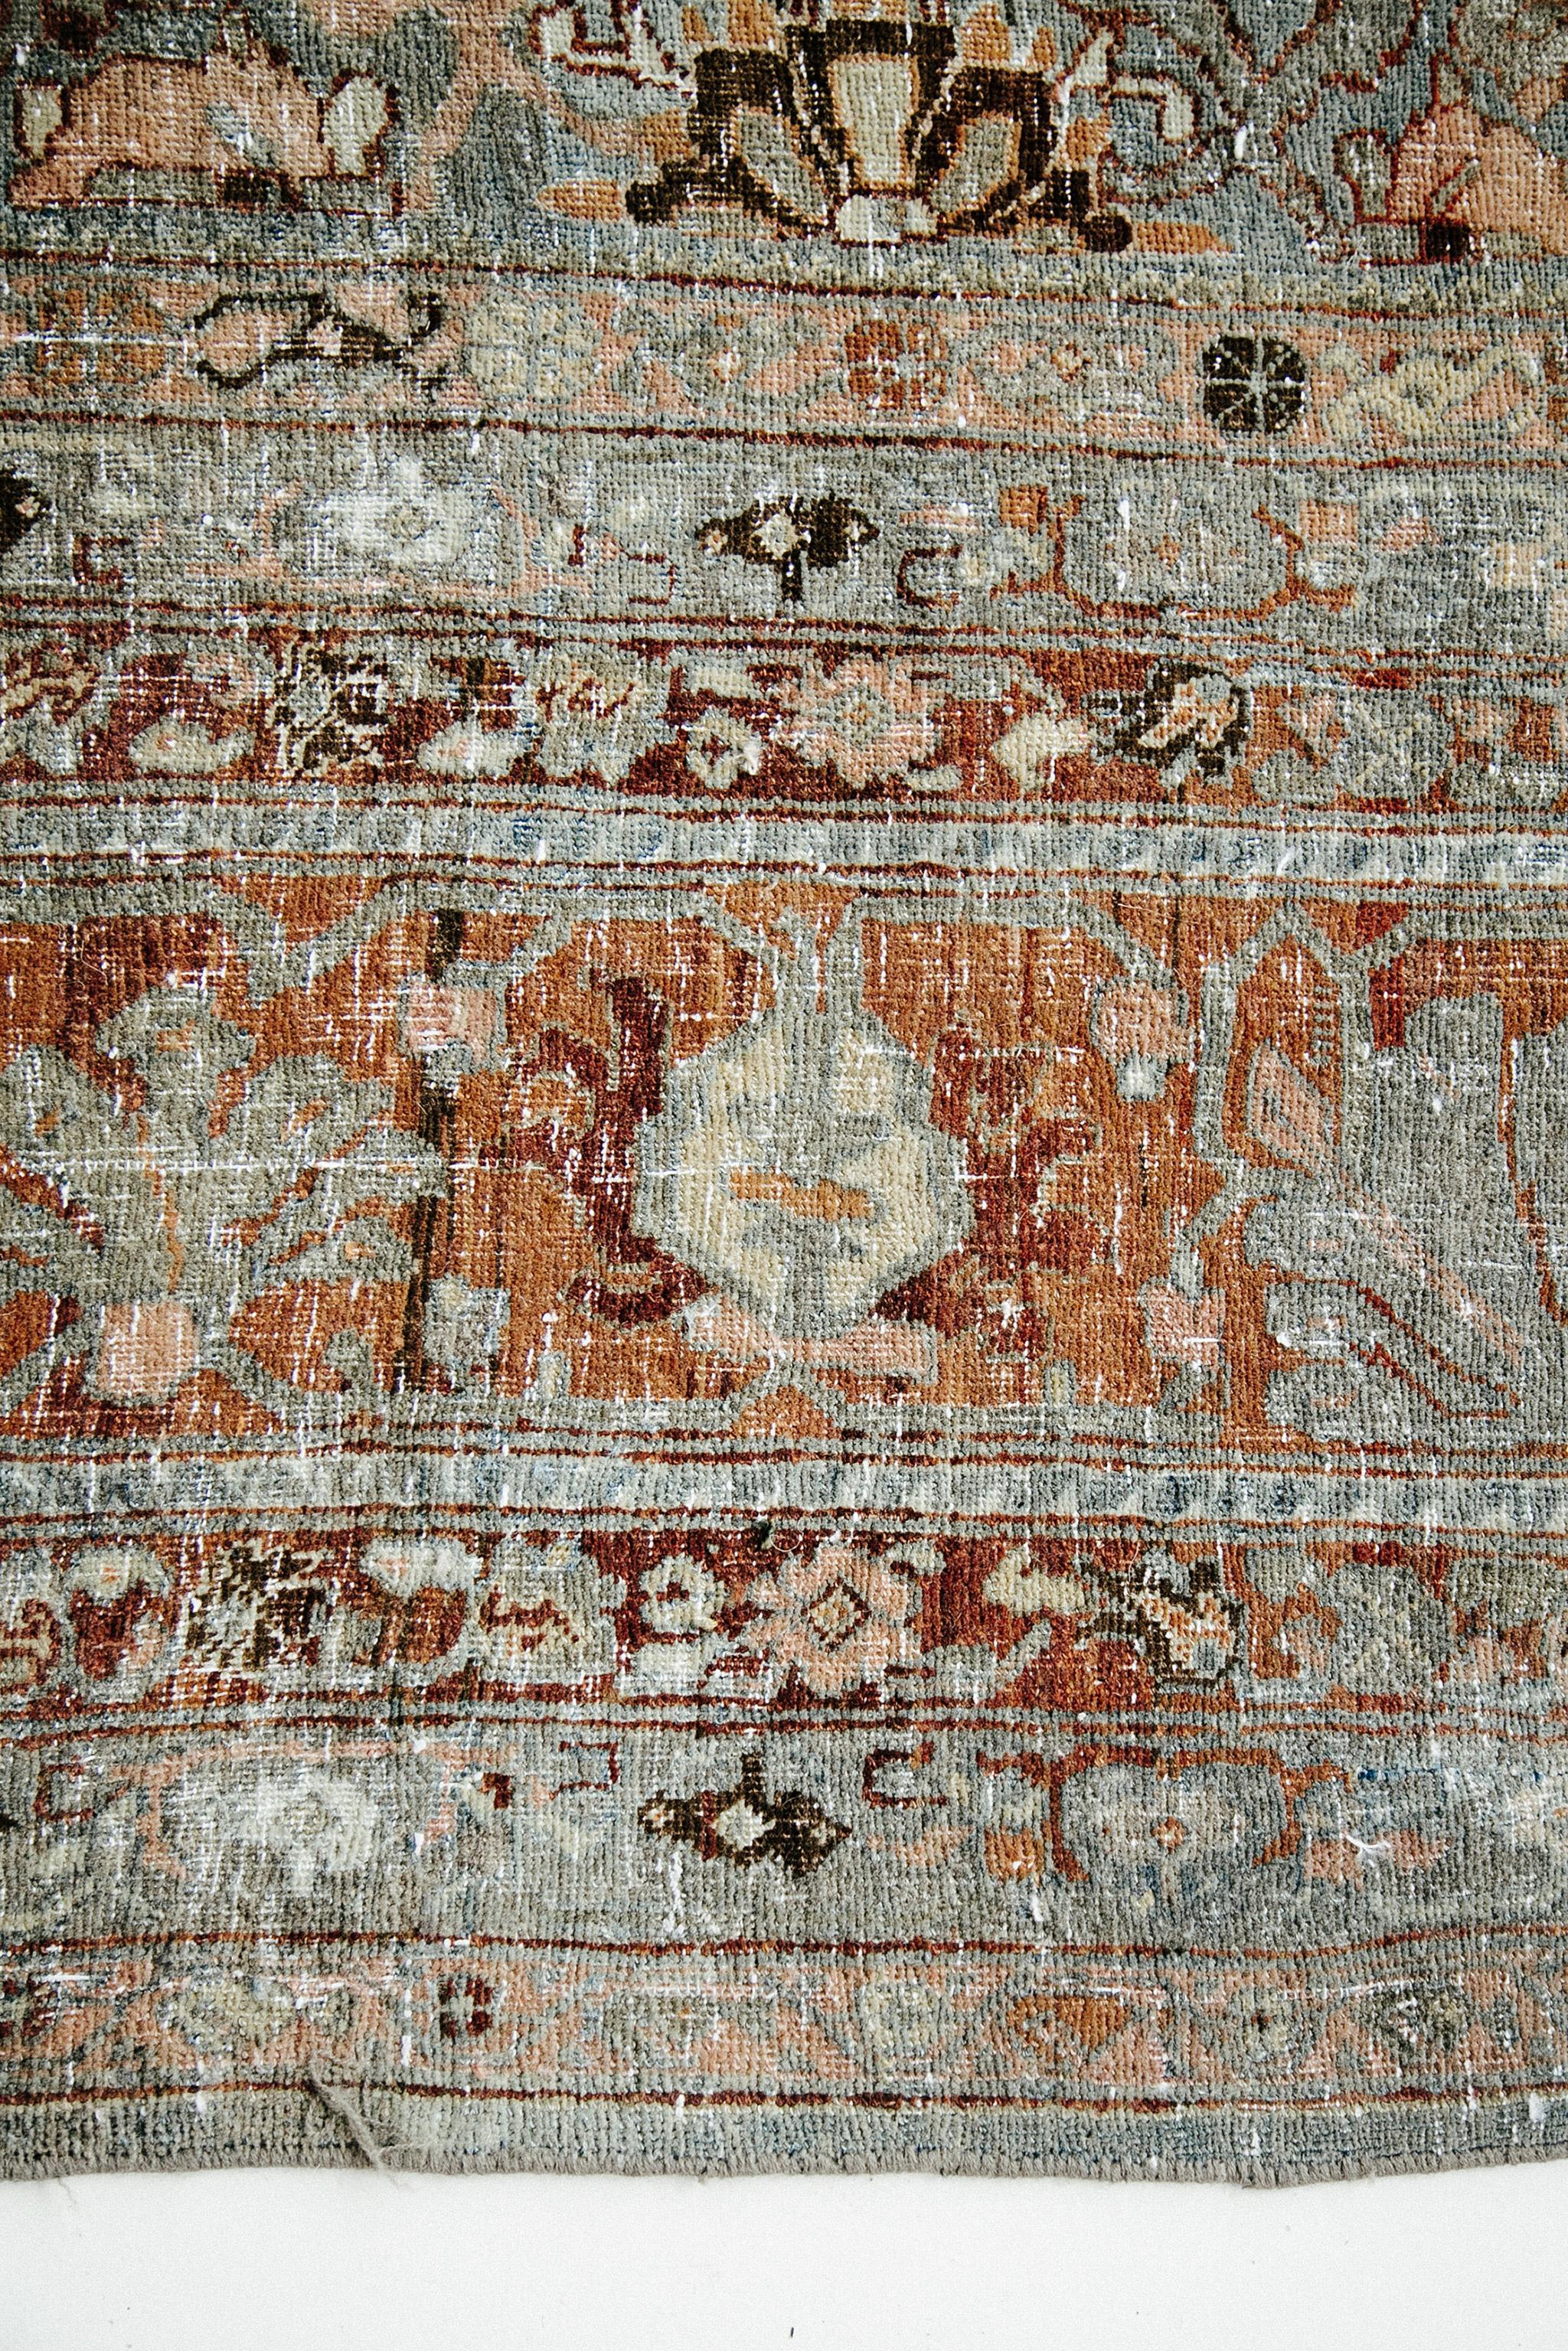 This fine Persian Bidjar rug features a large-scale floral and vine design throughout. The inner border contains a floral design set against a red background, while the outer border contains a light blue background.

Rug Number
26521
Size
13' 6